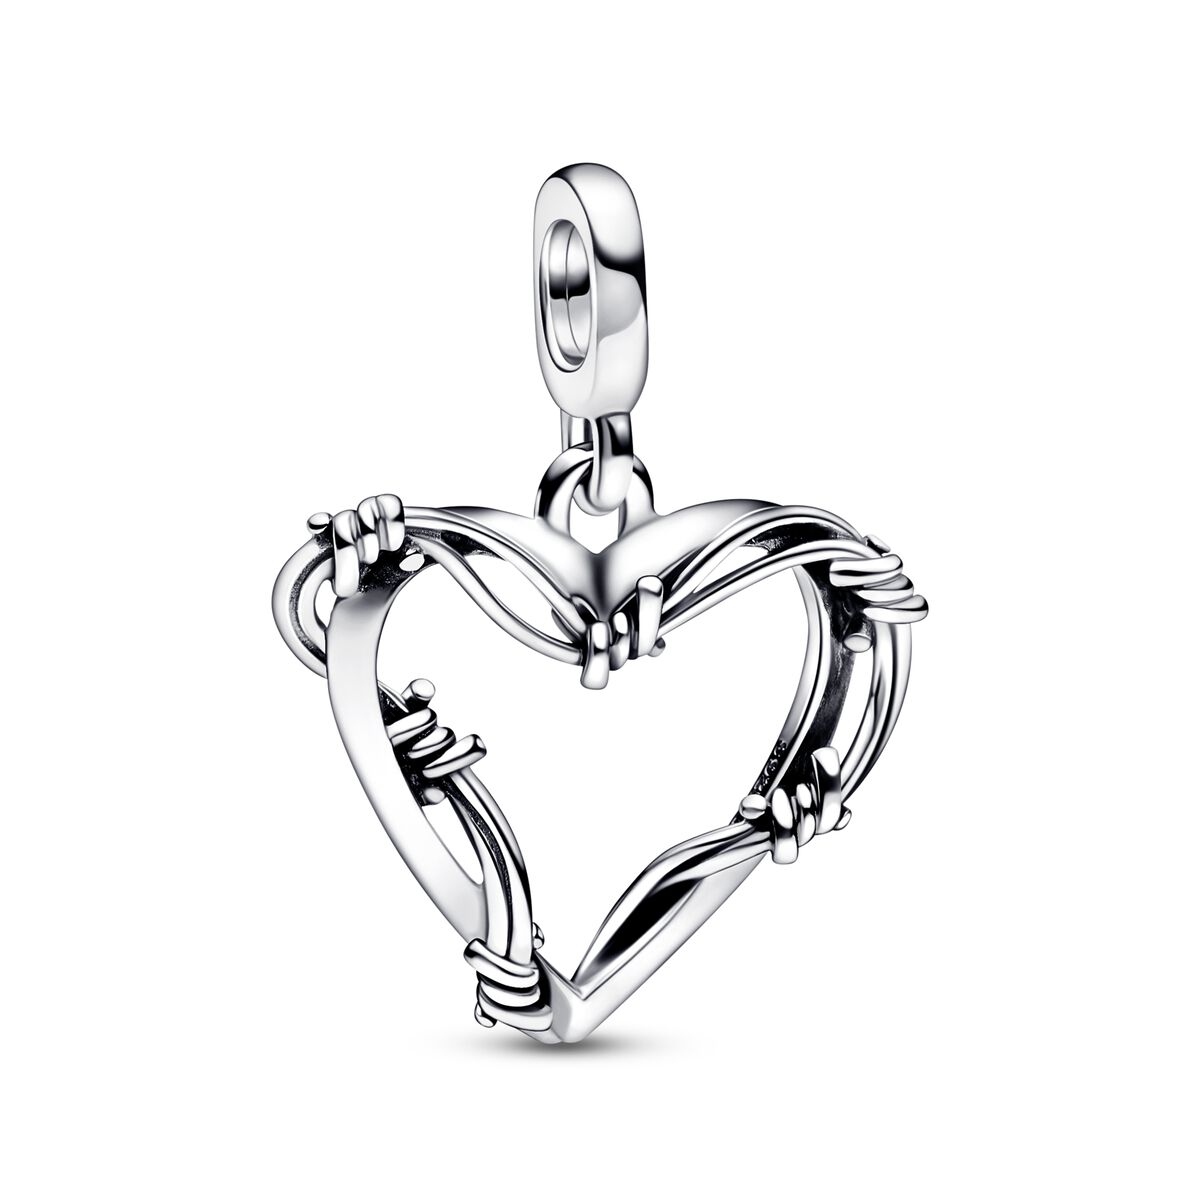 Medallion Wire Heart Pandora Me - Argento Sterling 925 / Nessun Colore product